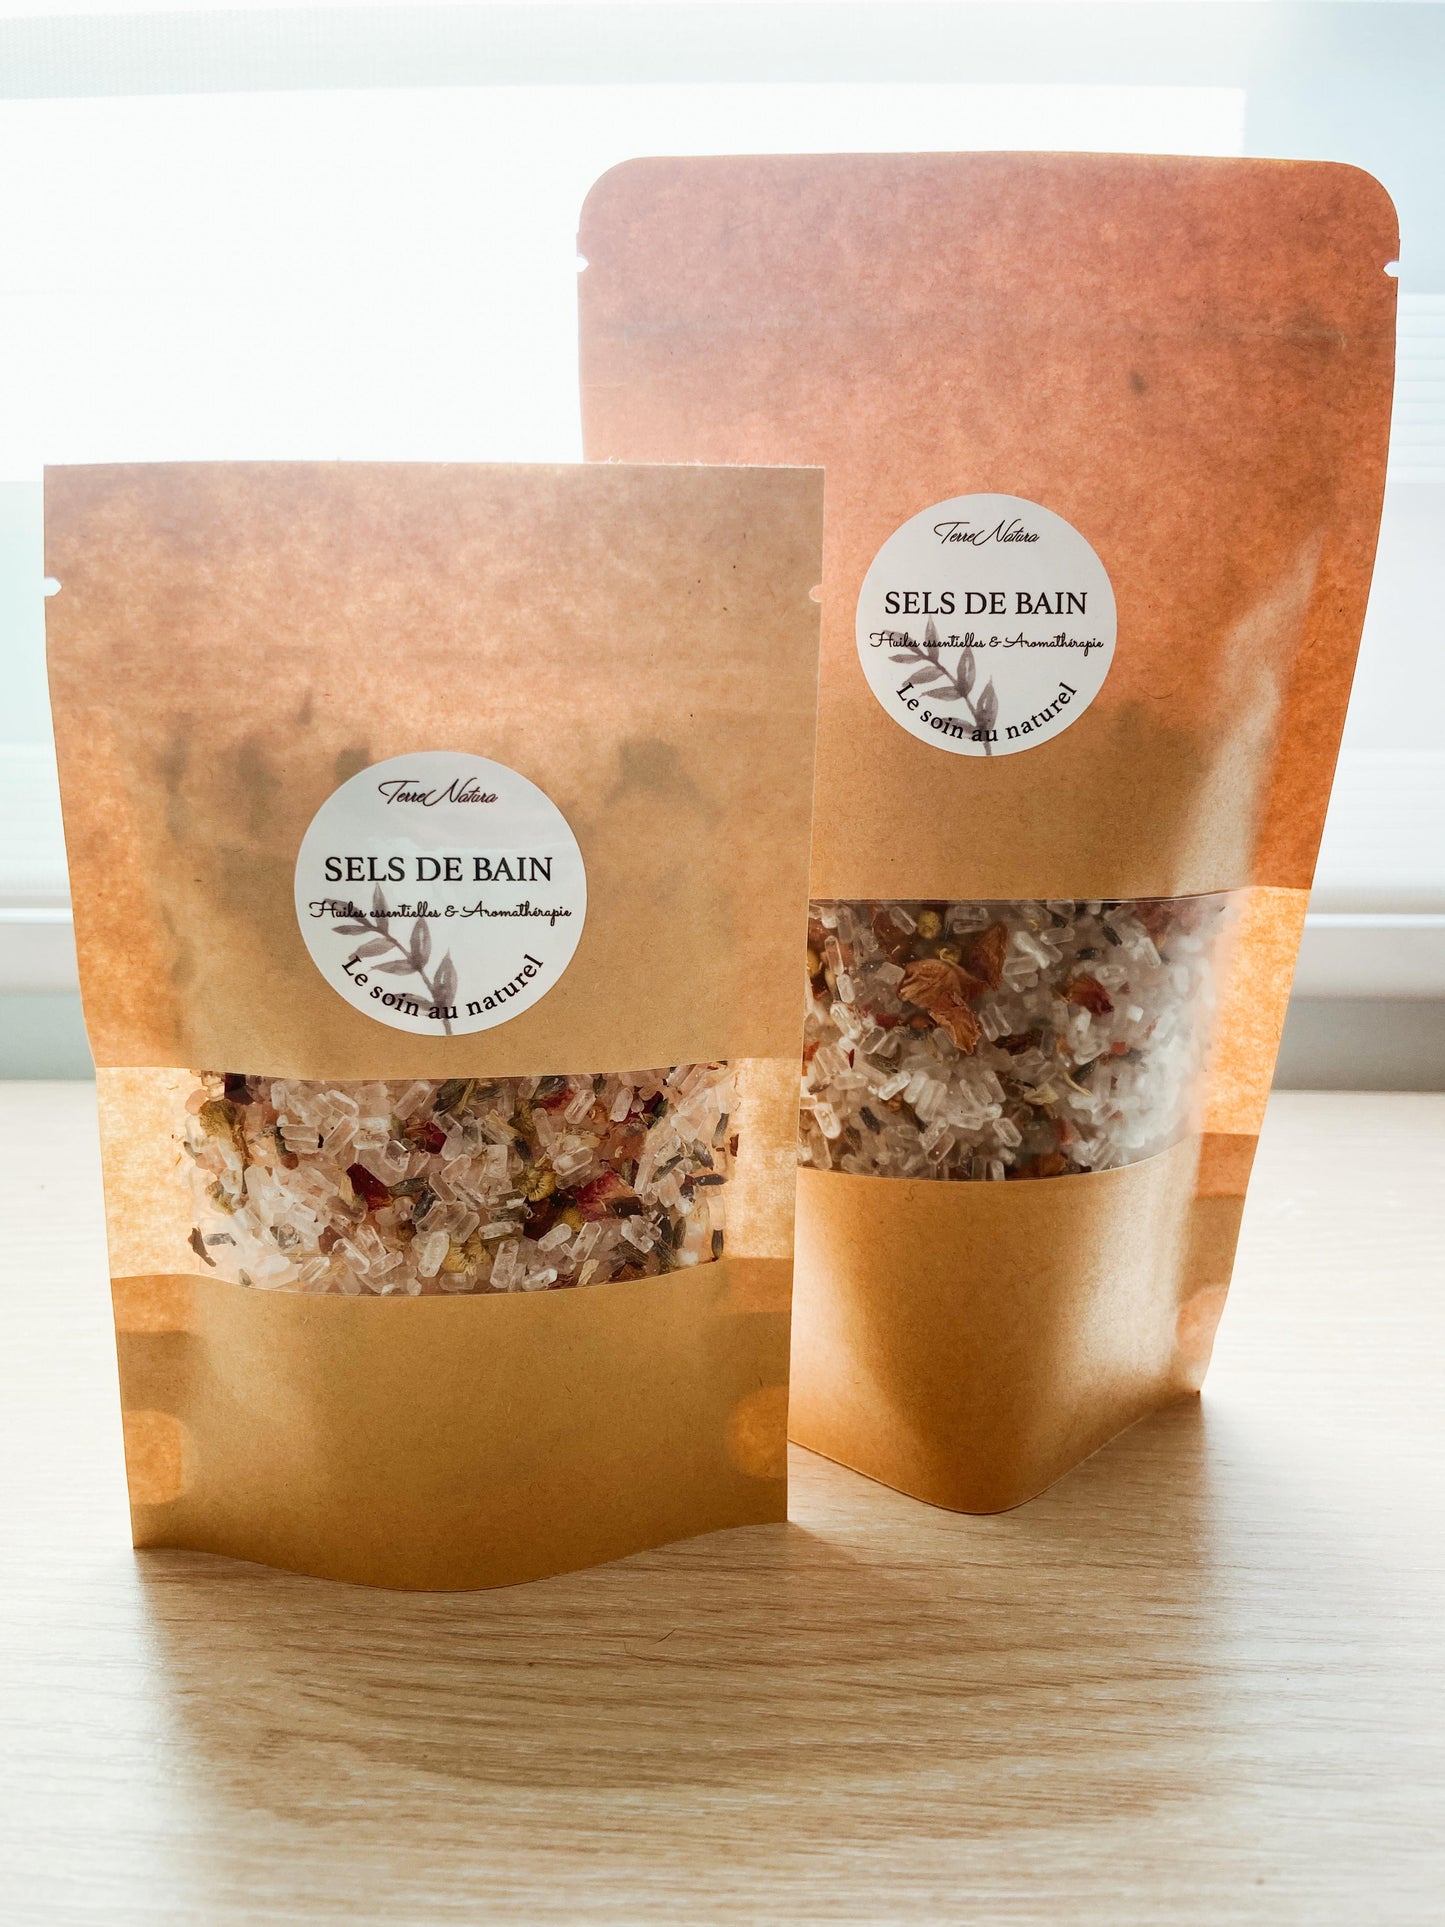 Personalized bath salts with essential oils